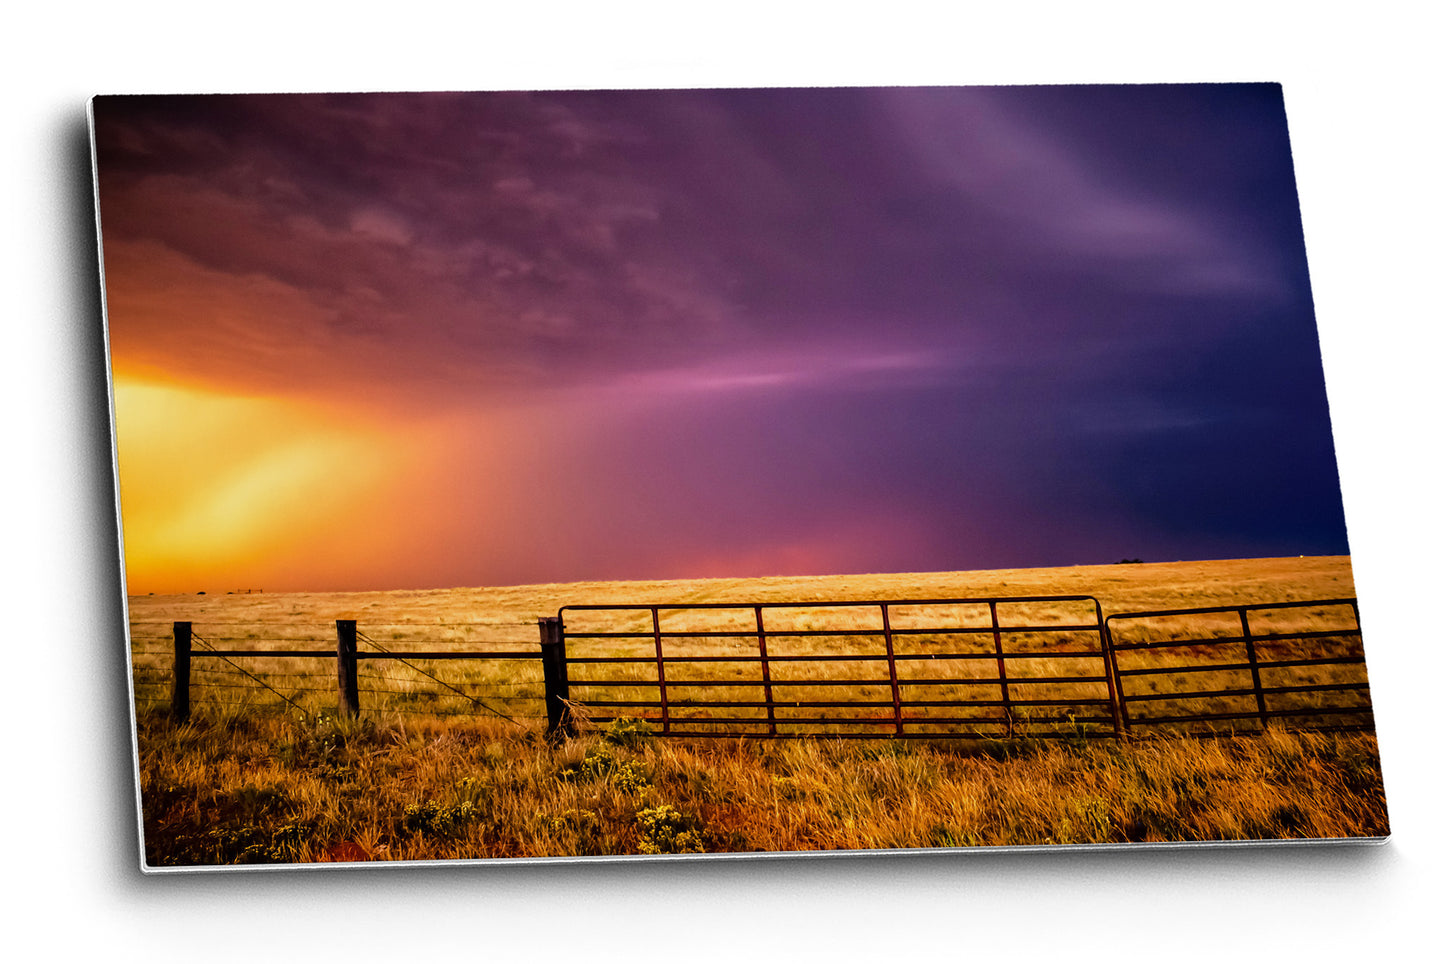 Western aluminum metal print wall art of a colorful sky over a fence gate on a stormy summer evening in Oklahoma by Sean Ramsey of Southern Plains Photography.